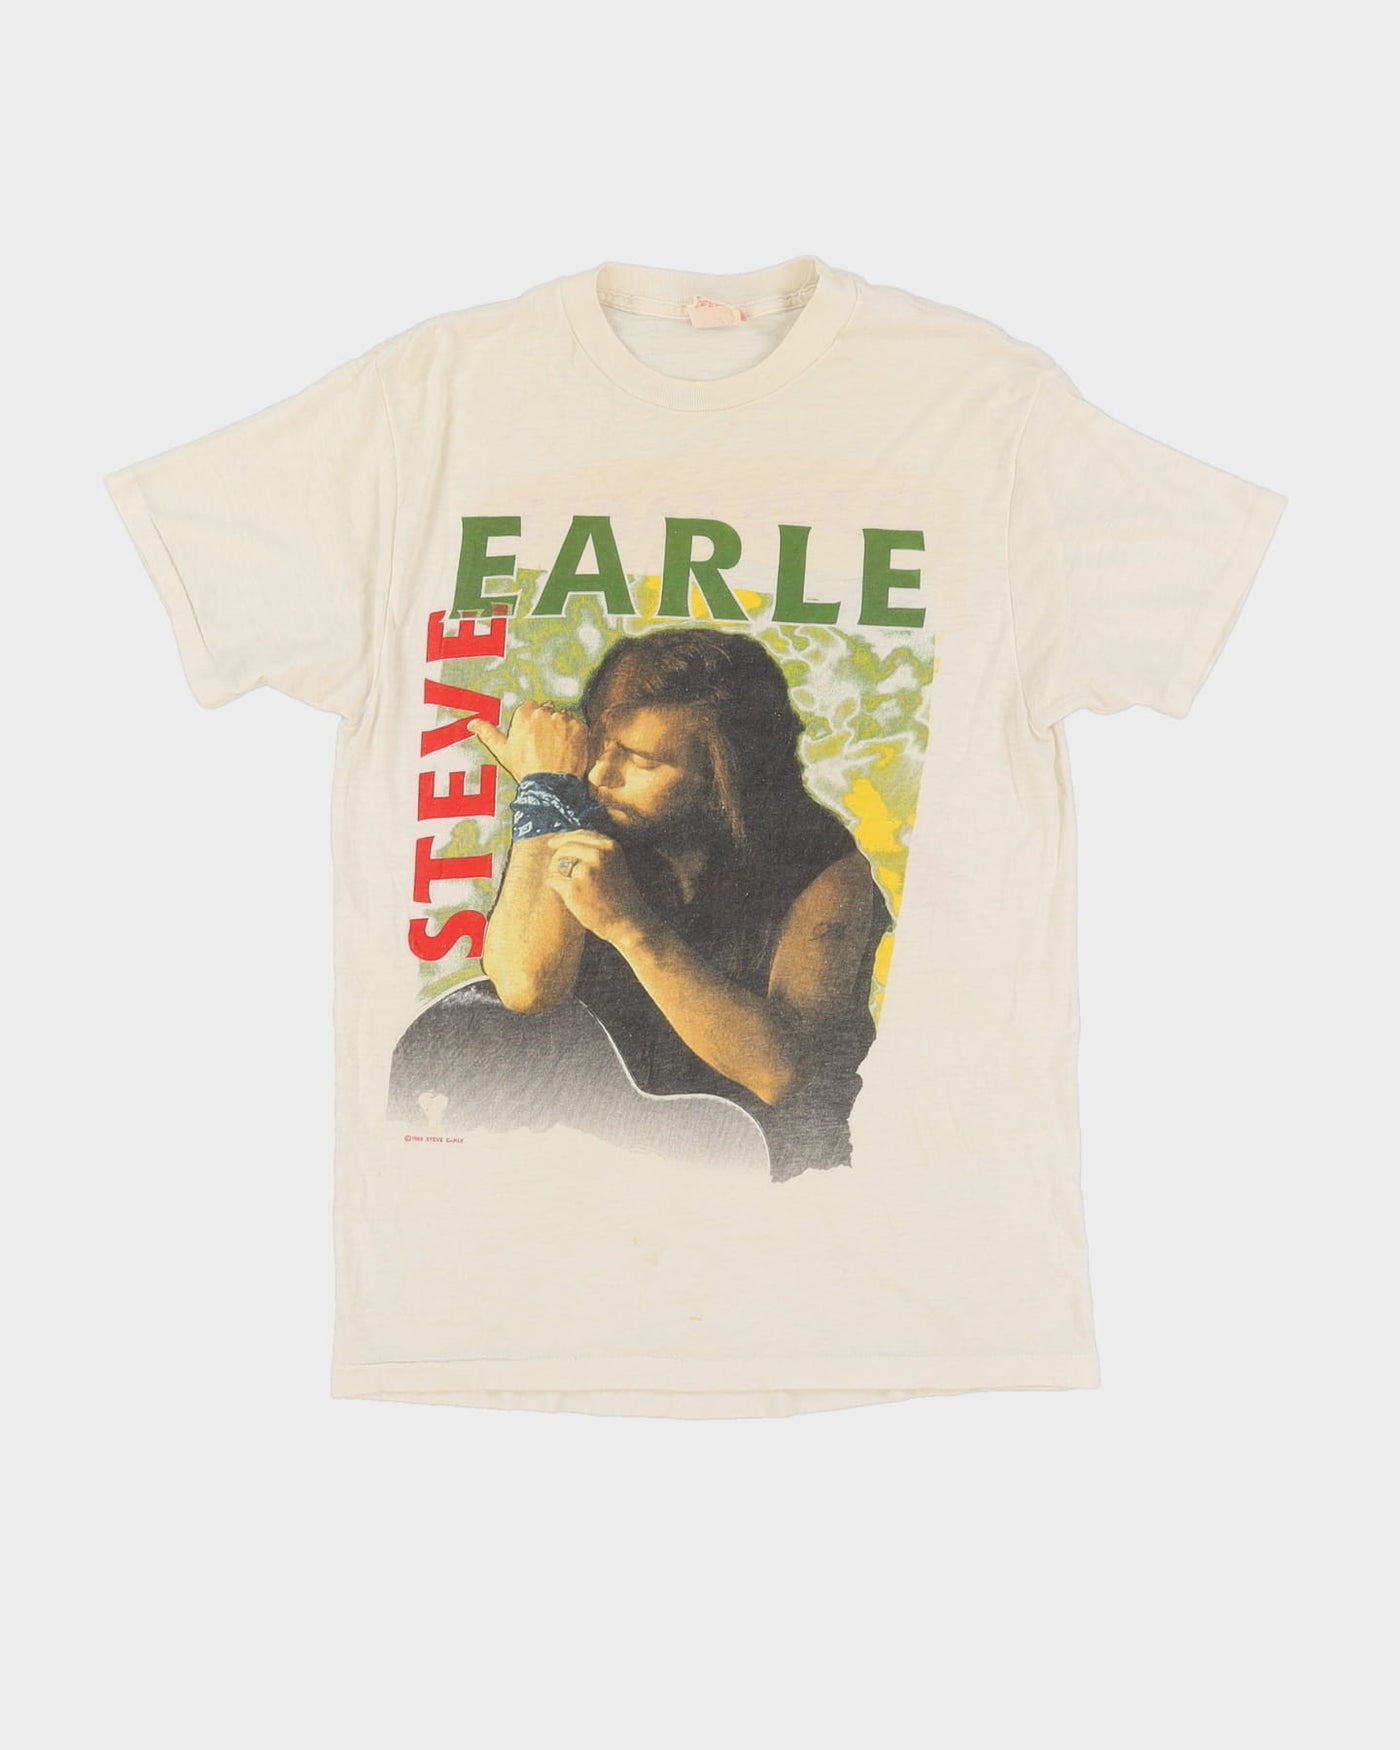 Vintage 1988 Steve Earle Graphic Band T-Shirt - XS